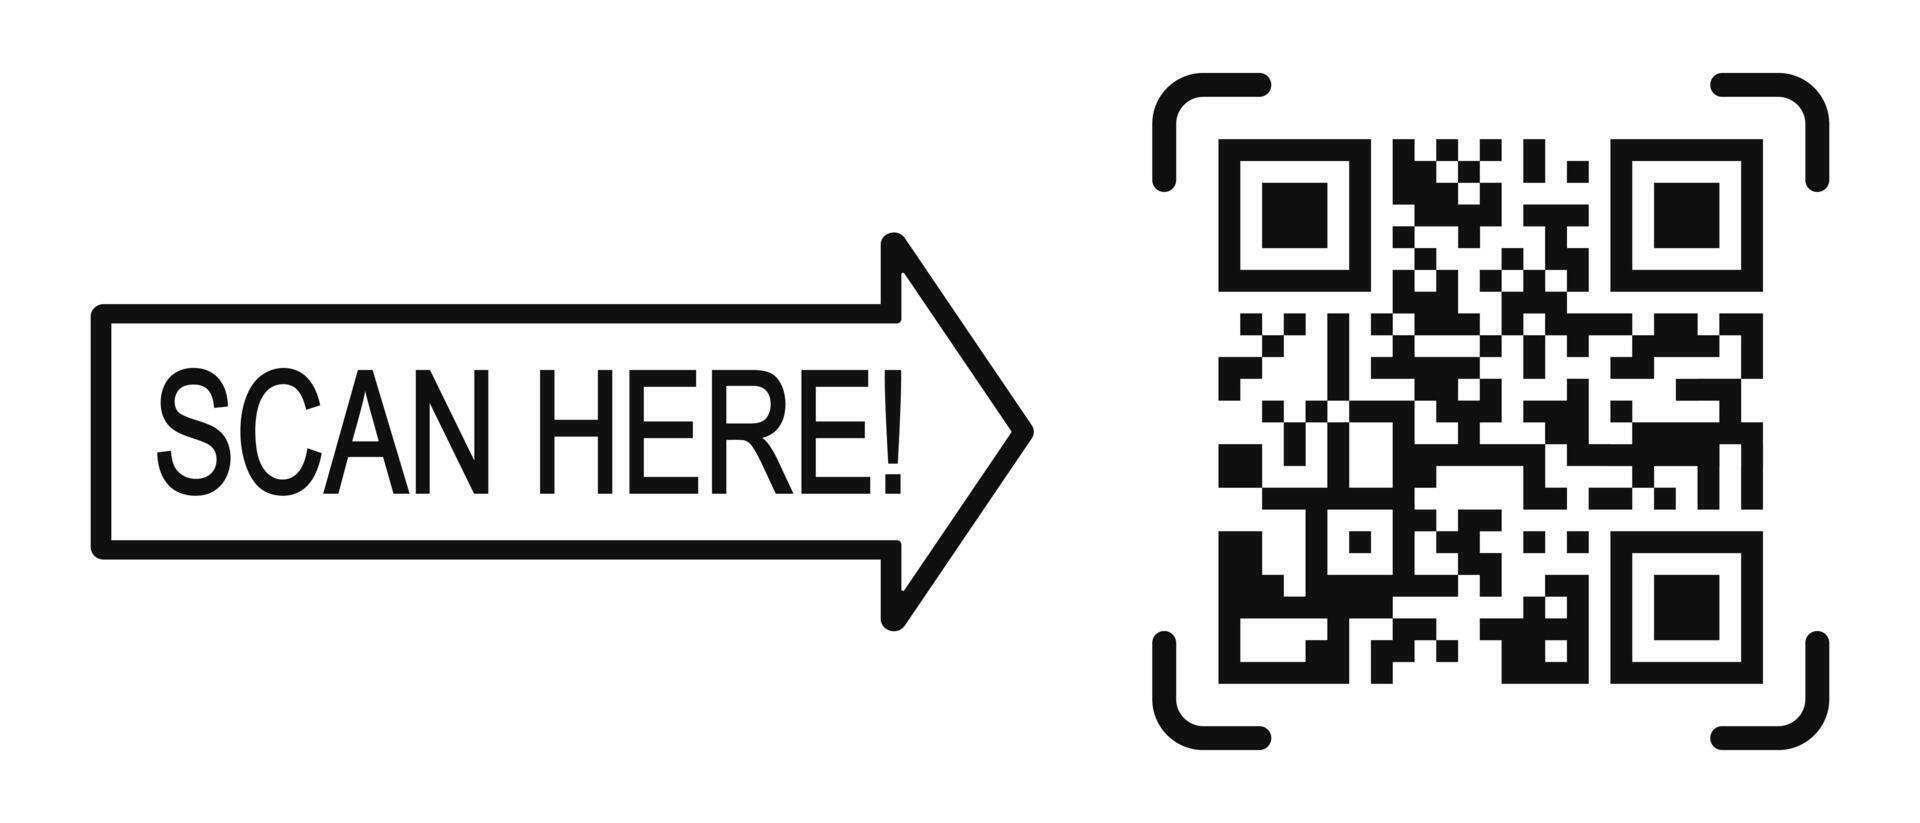 Scan here template with QR code pictogram. Quick responce matrix barcode readable by smartphone camera. Digital lebel with product information vector